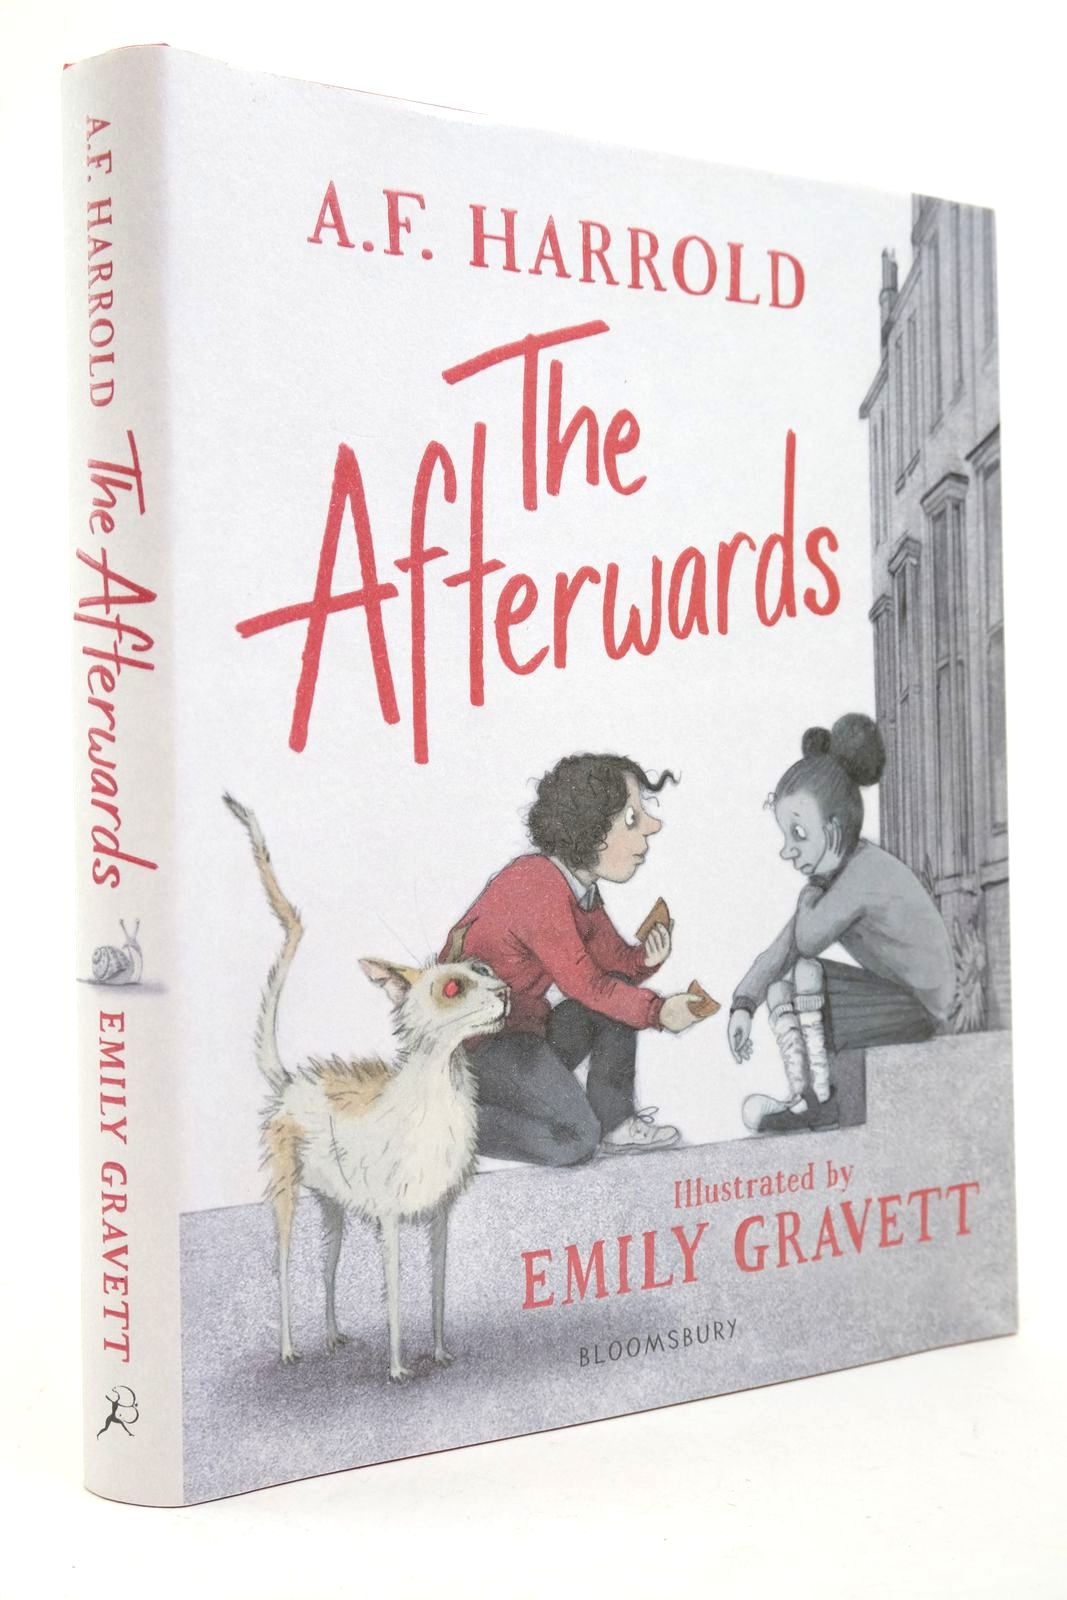 Photo of THE AFTERWARDS written by Harrold, A.F. illustrated by Gravett, Emily published by Bloomsbury Children's Books (STOCK CODE: 2140314)  for sale by Stella & Rose's Books